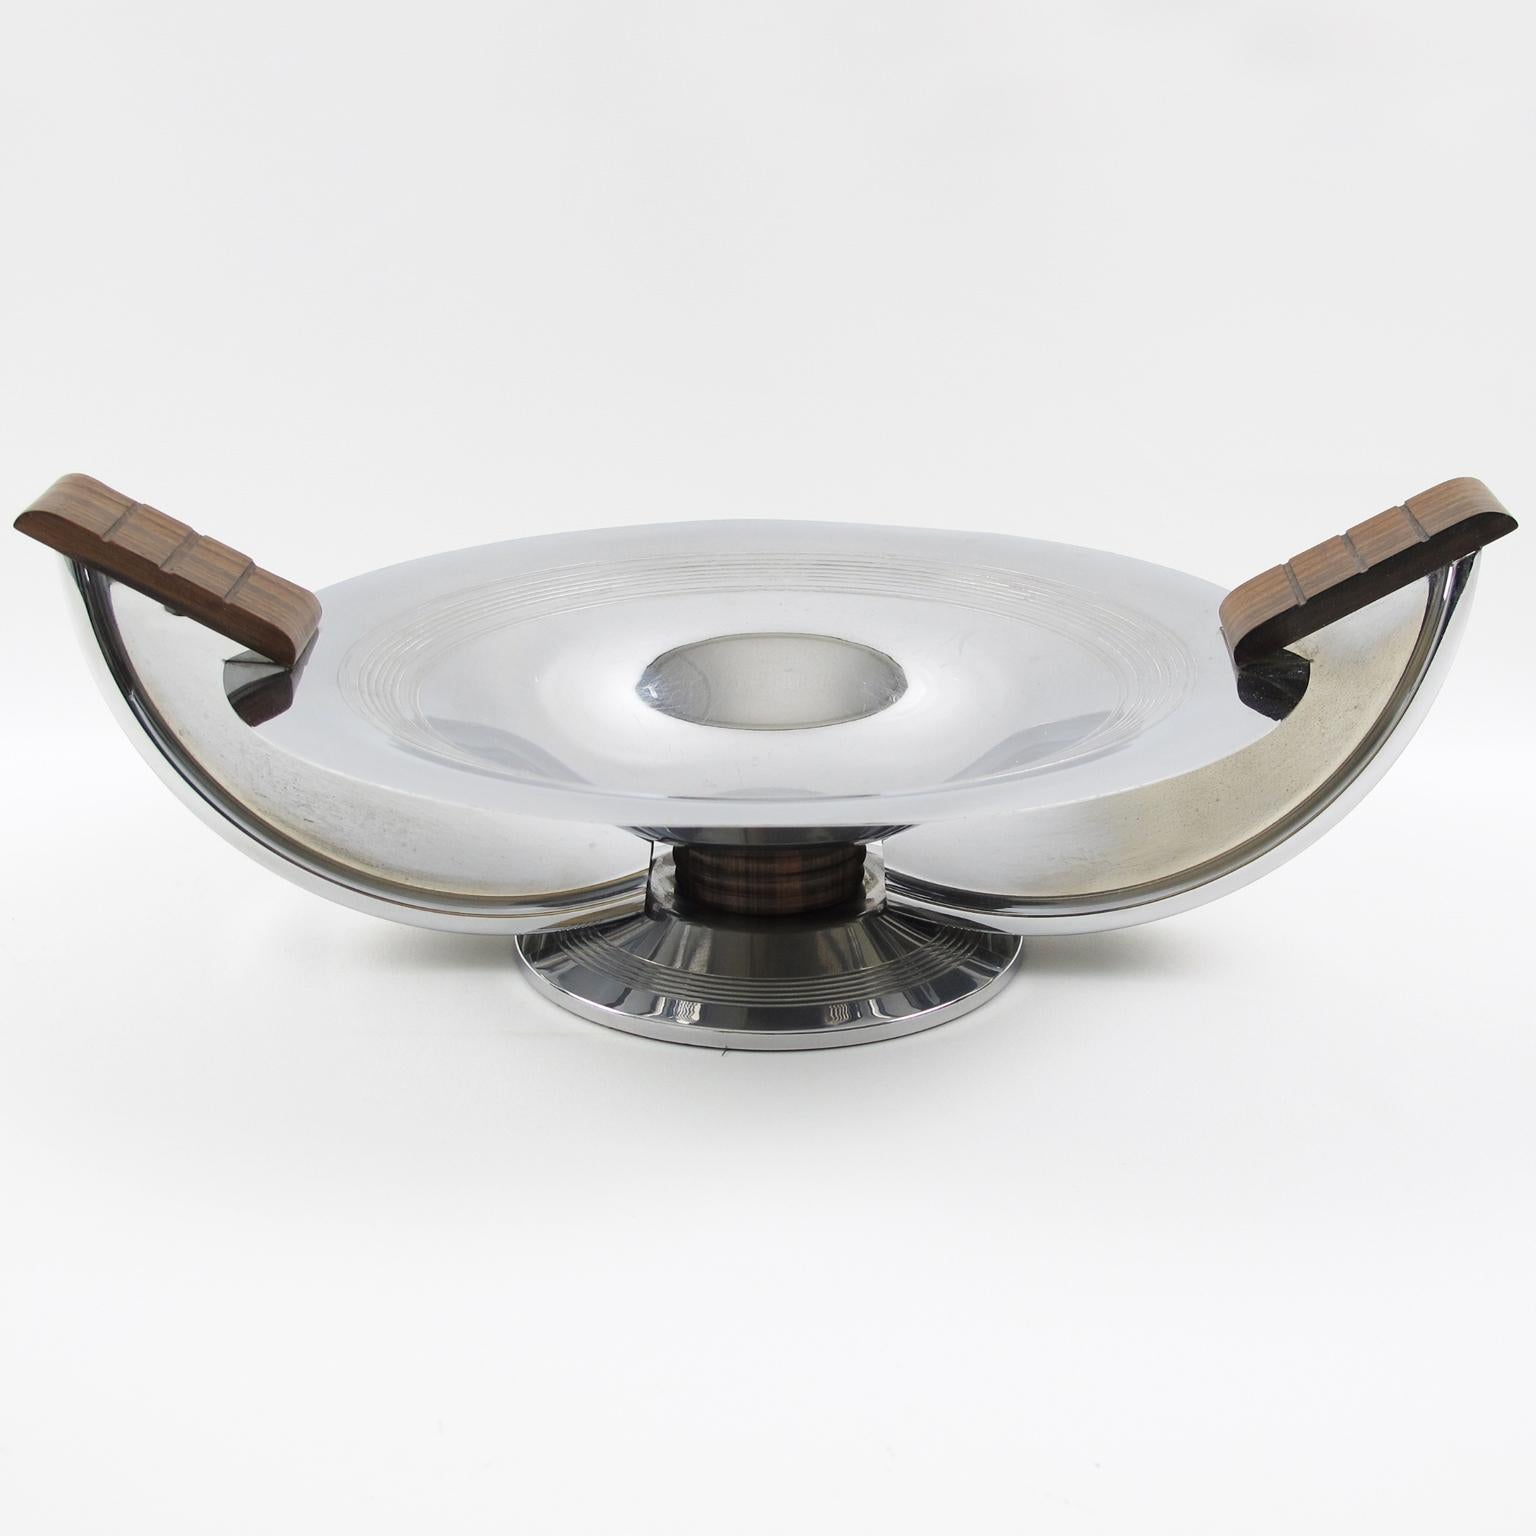 This stylish Art Deco centerpiece or decorative bowl was hand-crafted by French silversmith Massabova, Paris, in the 1930s. The round geometric shape has wing handles. The chrome-plated metal body is ornate with carved Macassar wood and complemented